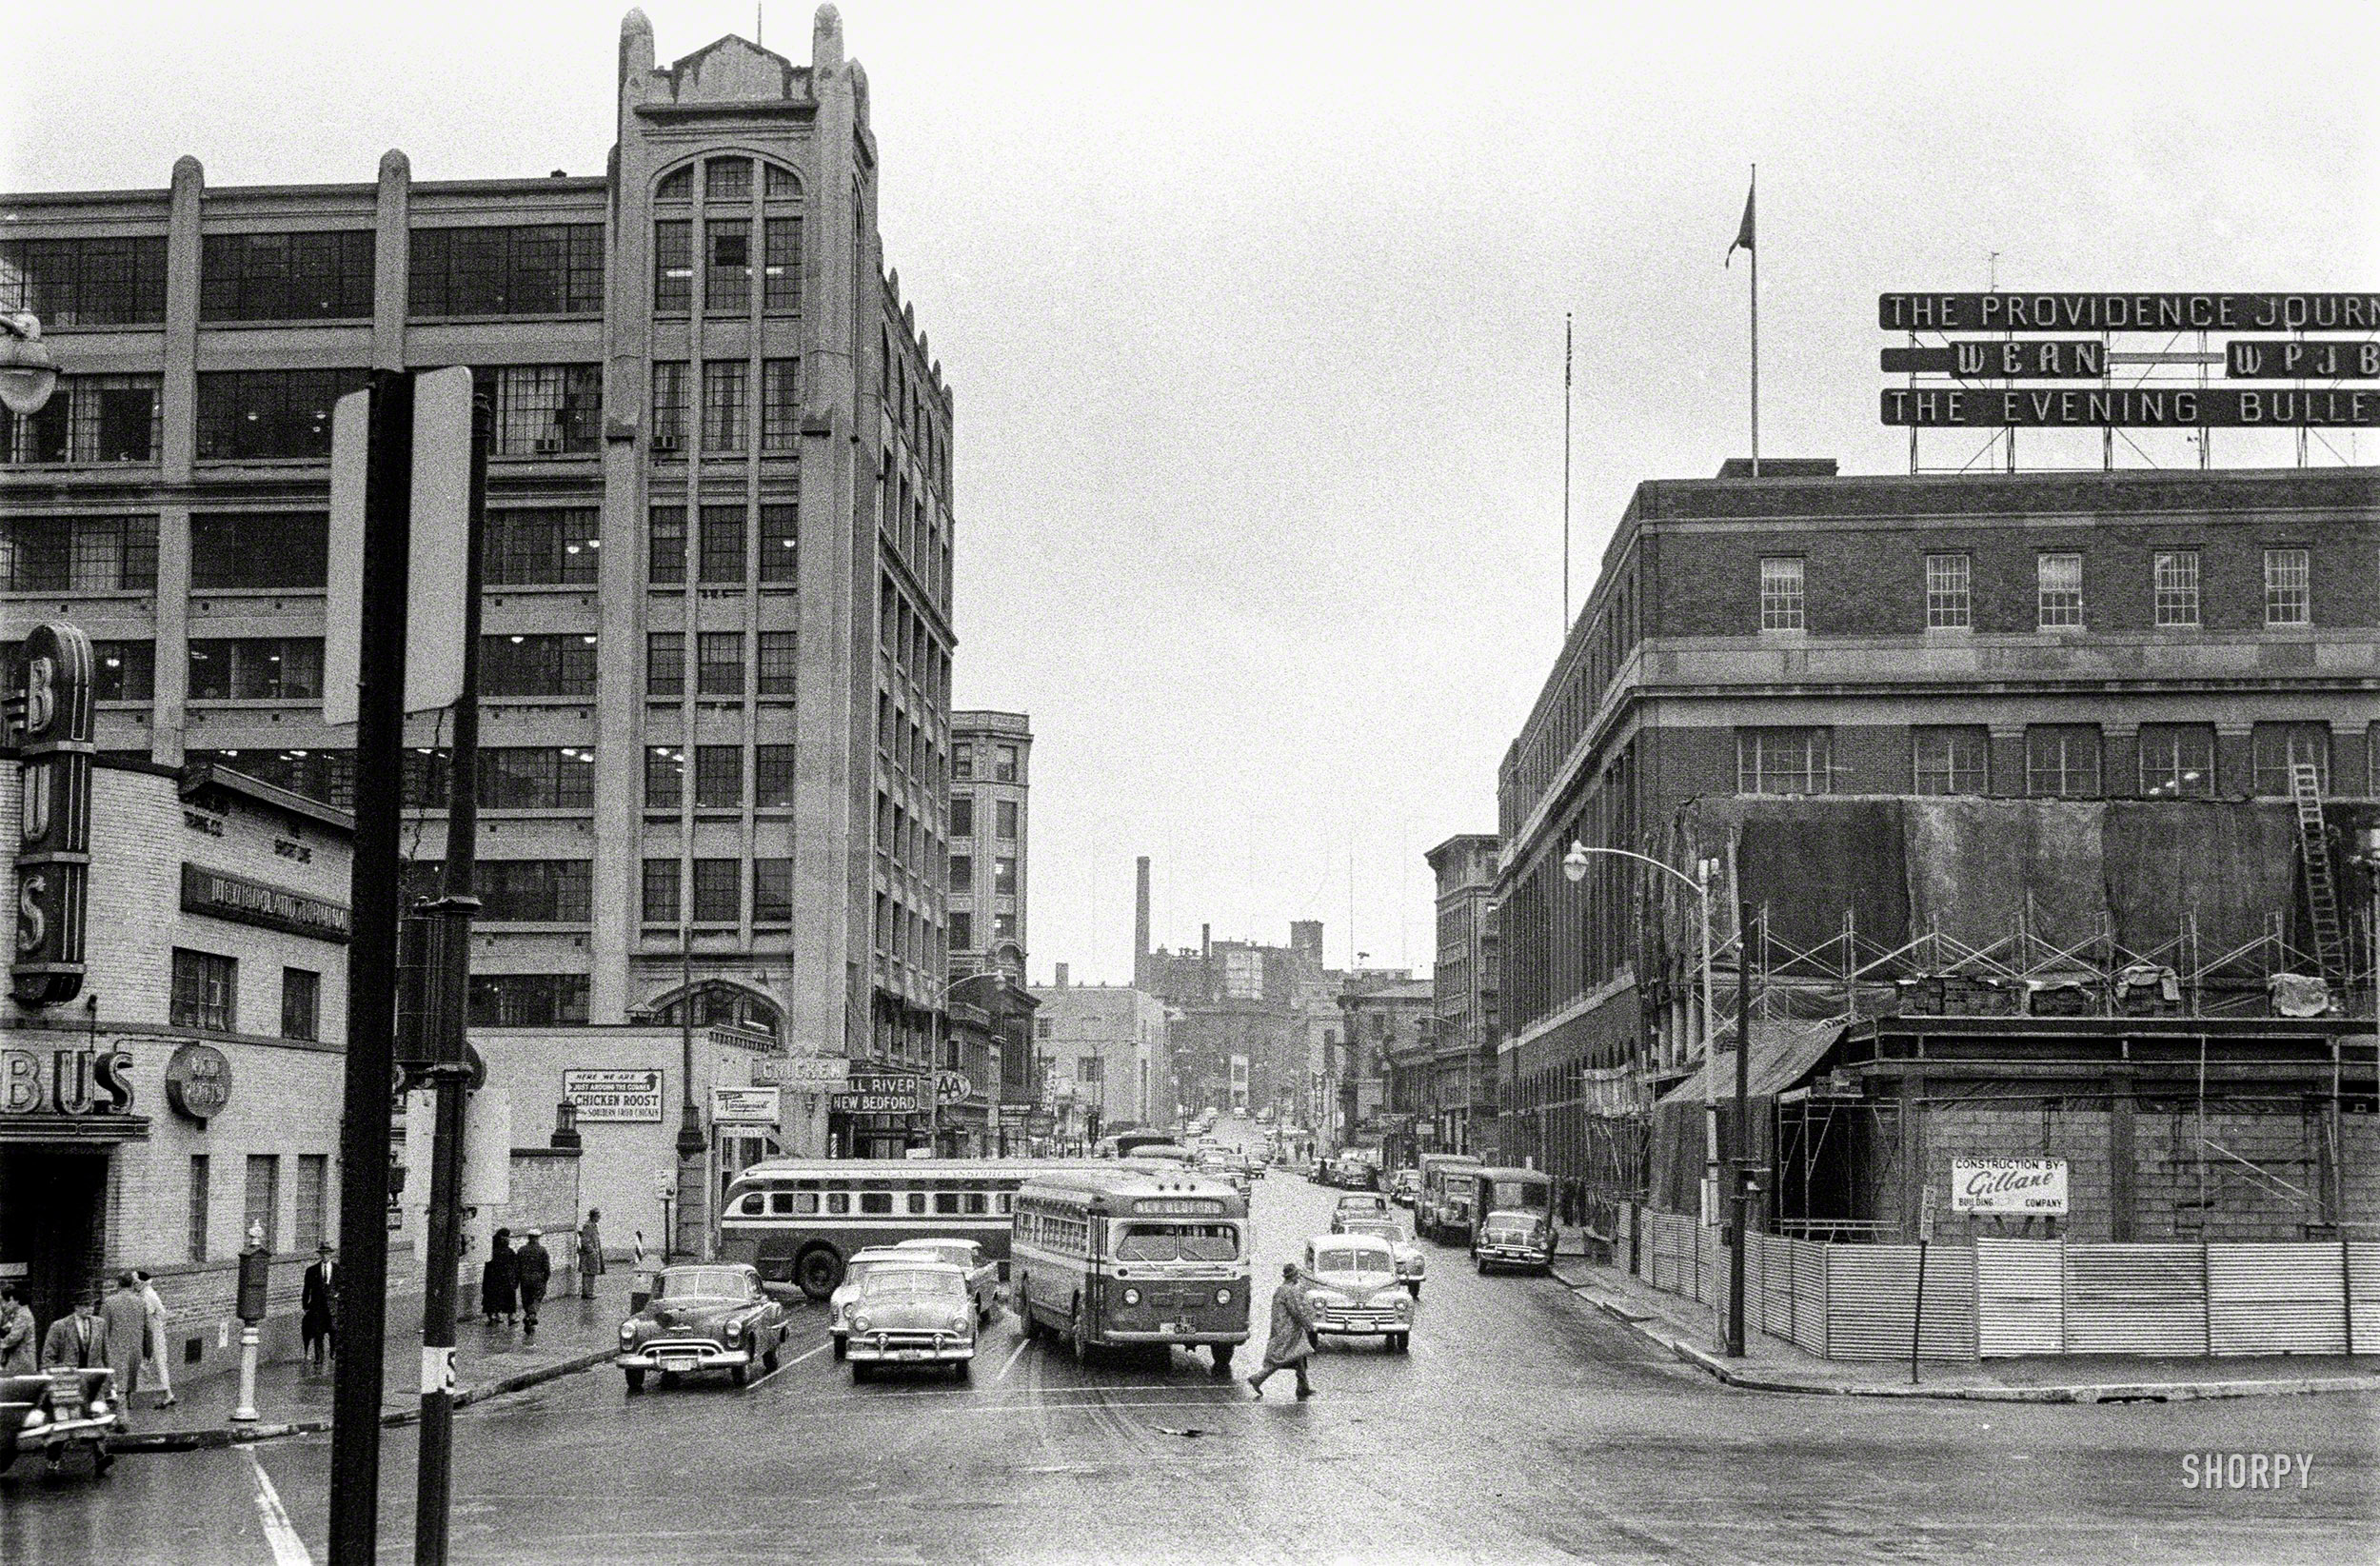 "Street scene, Providence, 1957." Featuring the New England Terminal Co. bus station, Chicken Roost restaurant and Journal-Bulletin newspaper building. 35mm negative, photographer unknown. View full size.